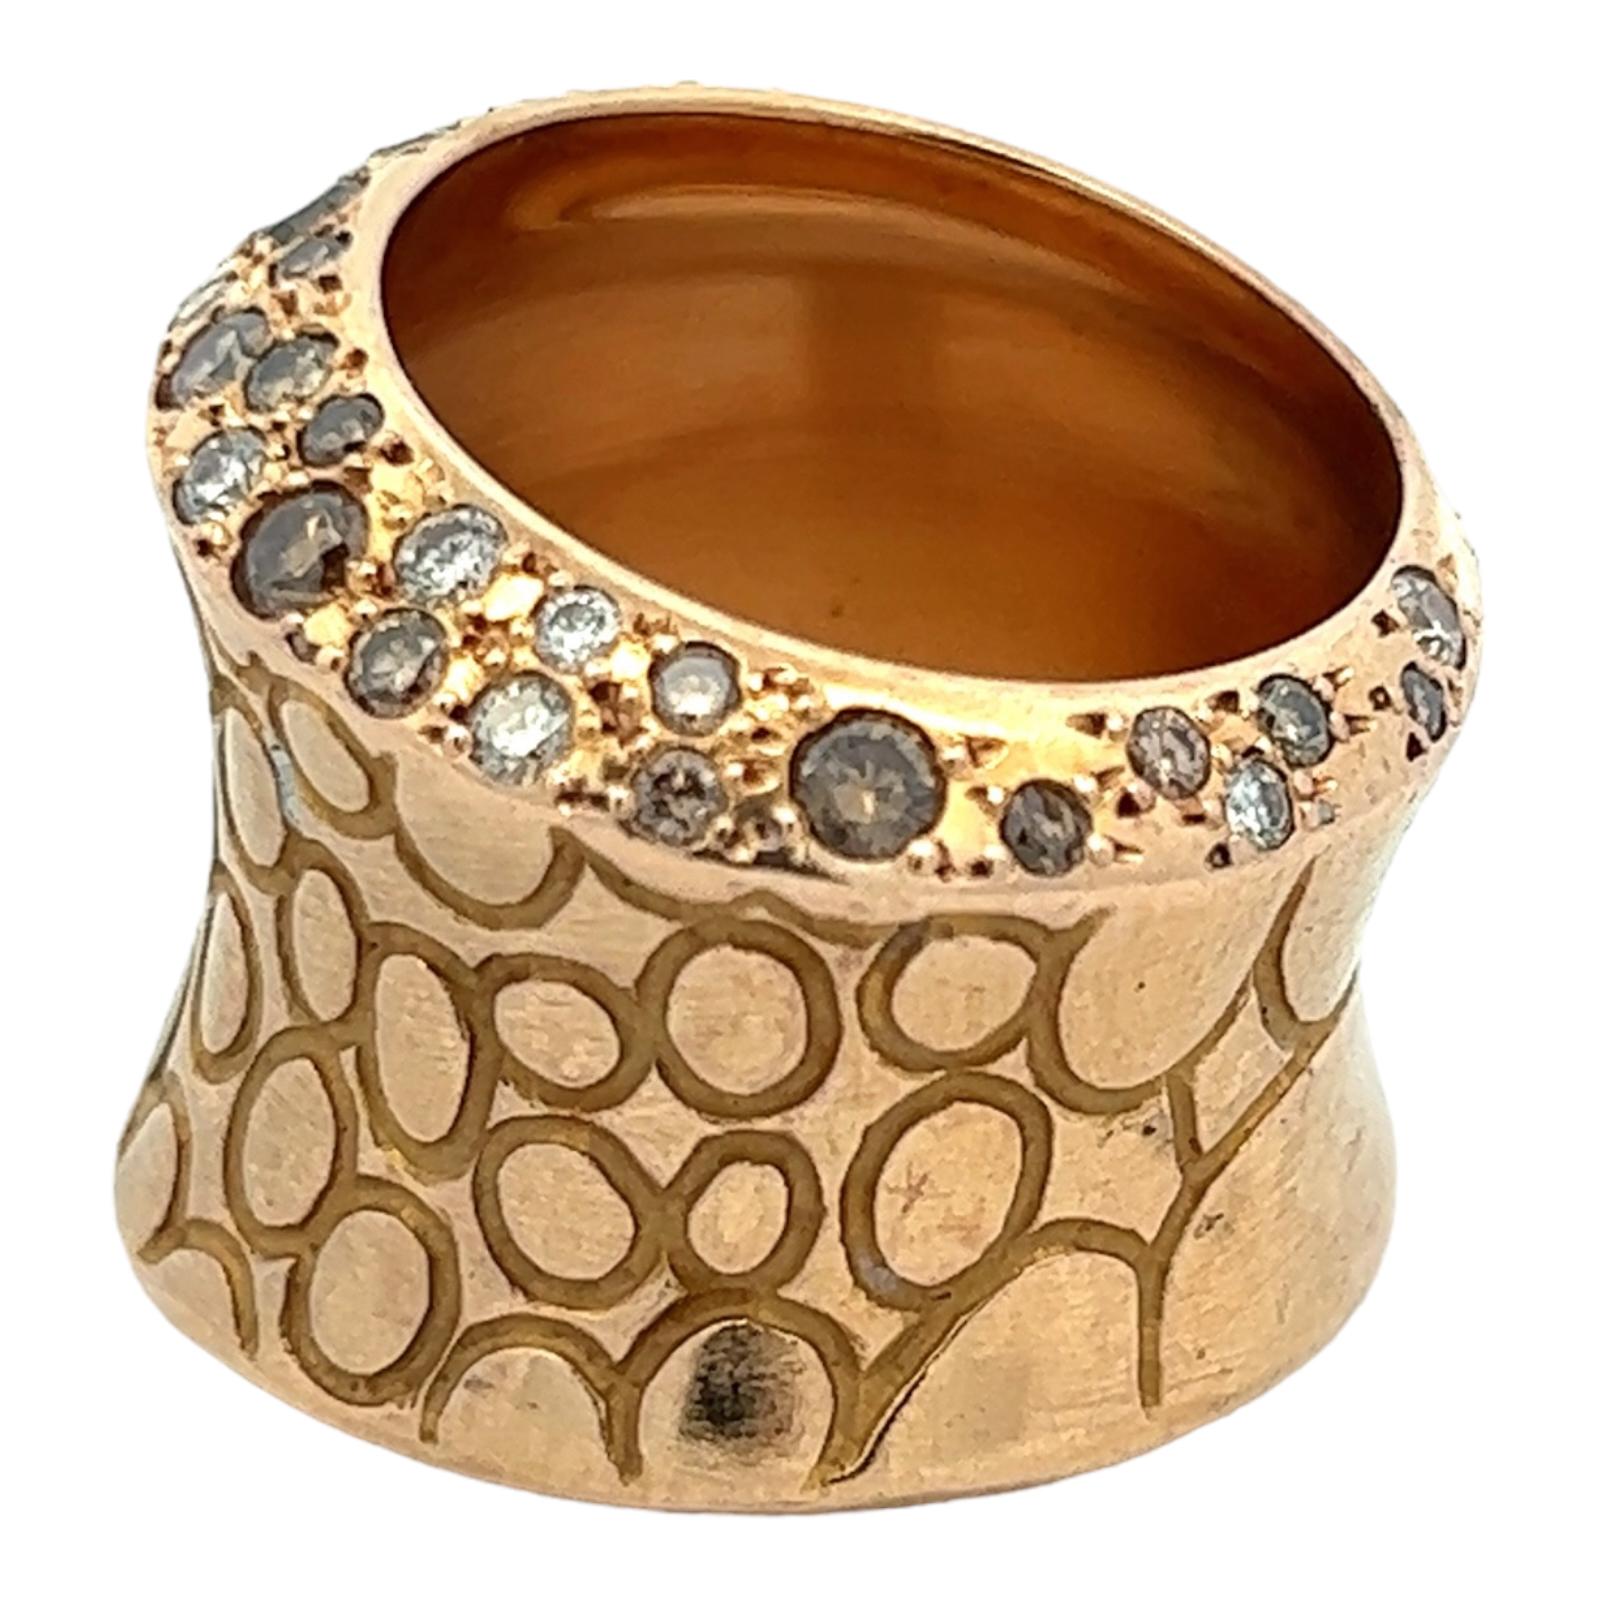 Sophisticated and high fashion wide band ring by Pomellato. The Cocco ring sparkles with round brilliant white and champagne diamonds weighing .90 carat total weight. The graduated band features an array of circles carved 18 karat rose gold